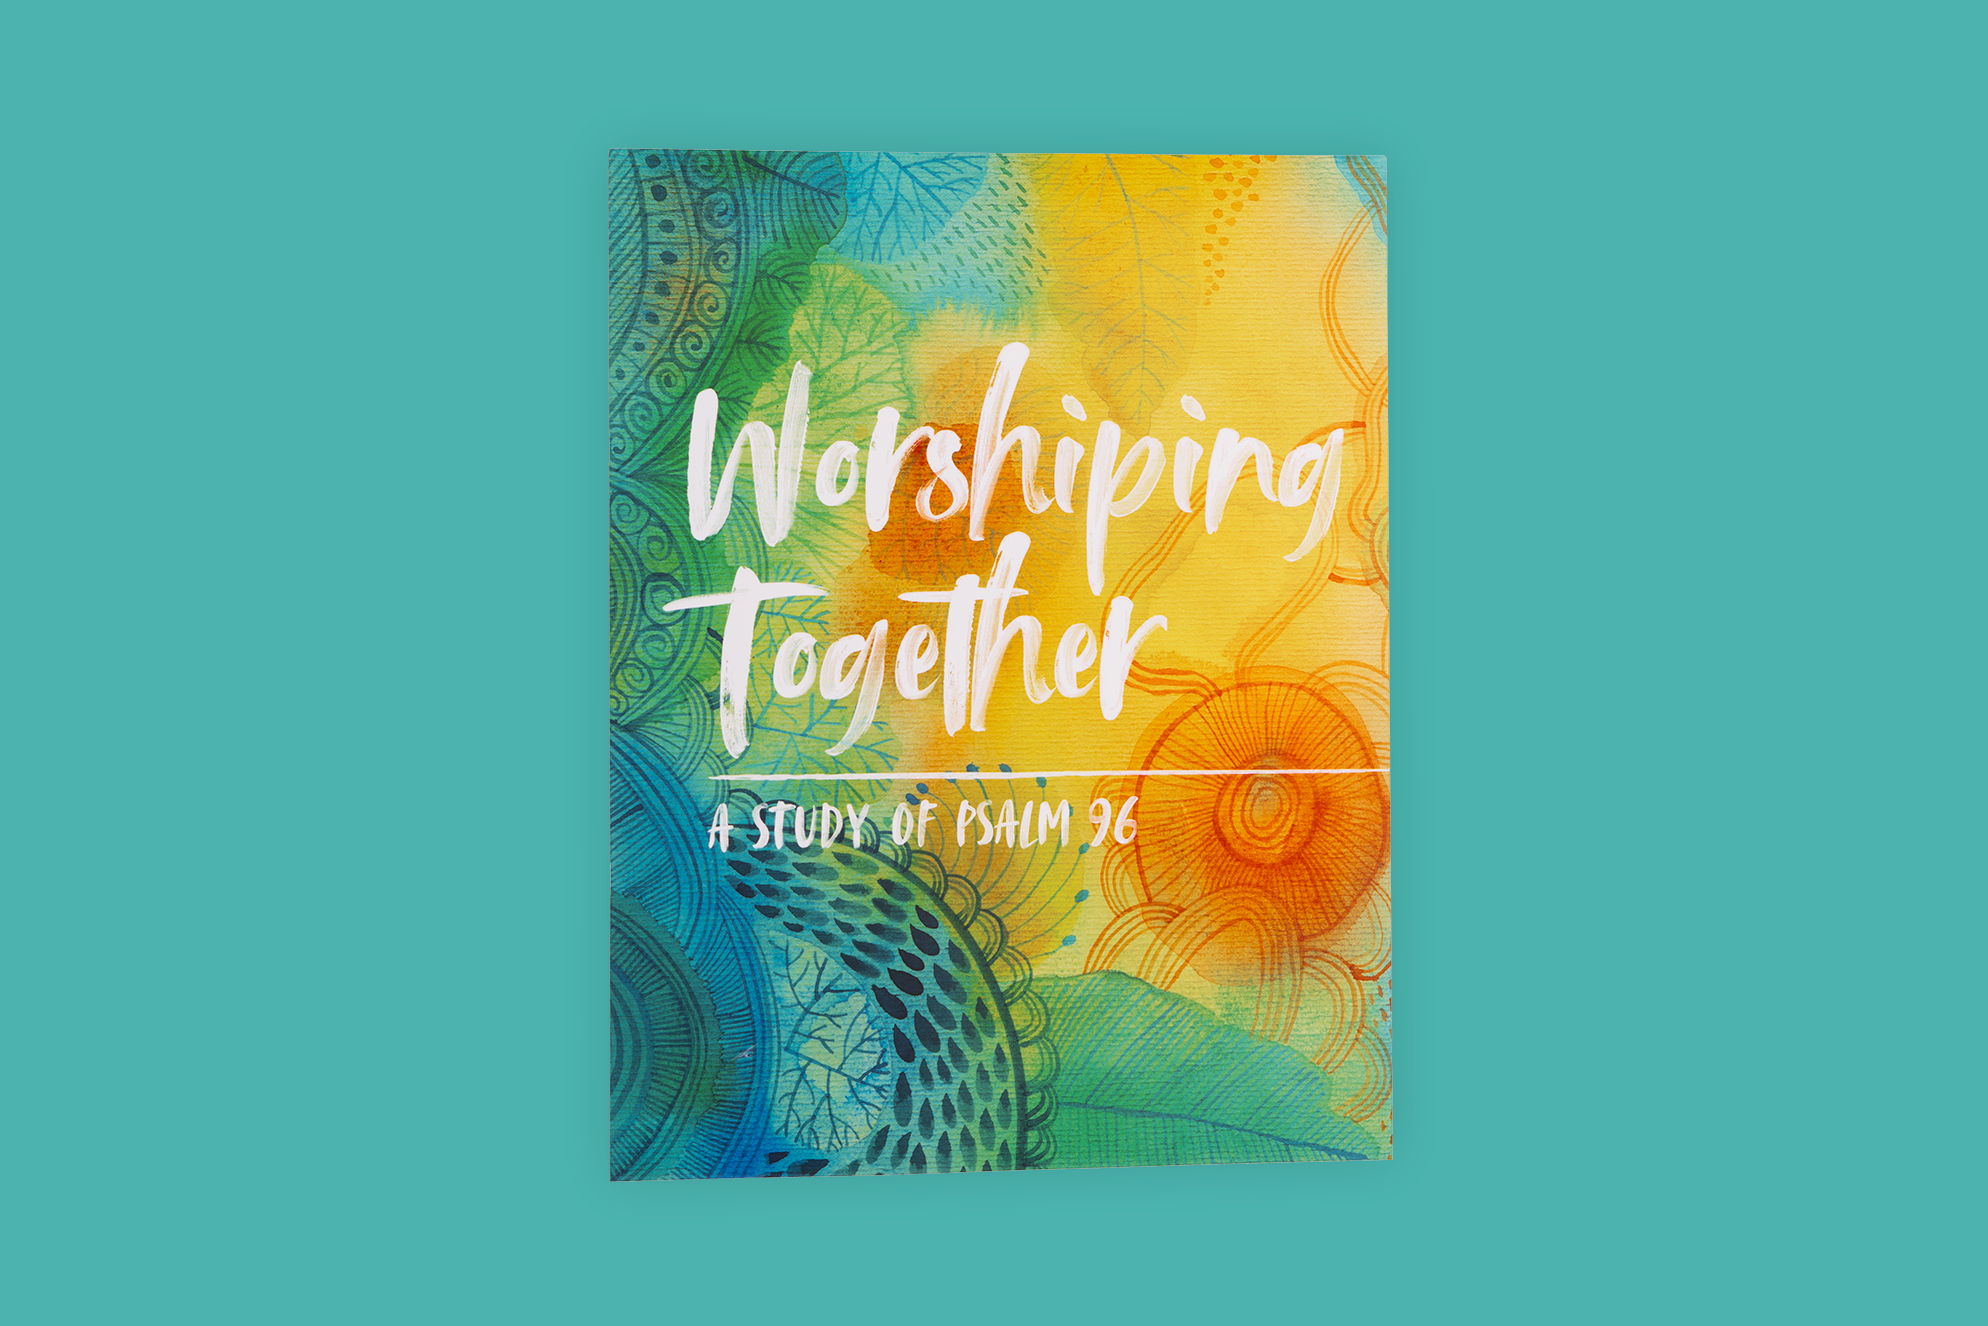 Now Available: Worshiping Together